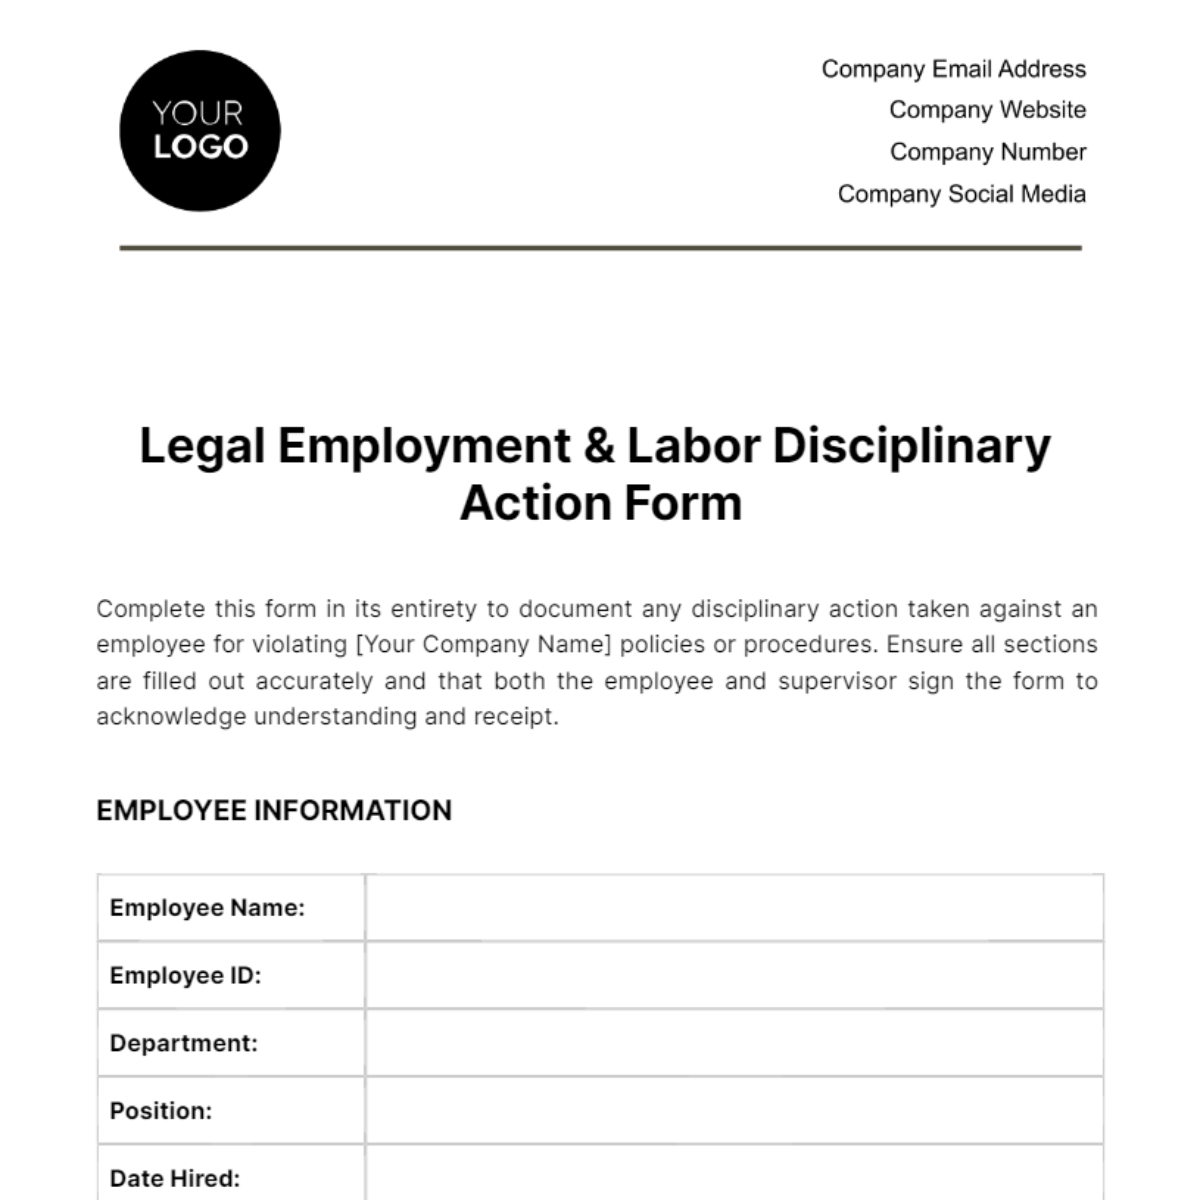 Legal Employment & Labor Disciplinary Action Form Template